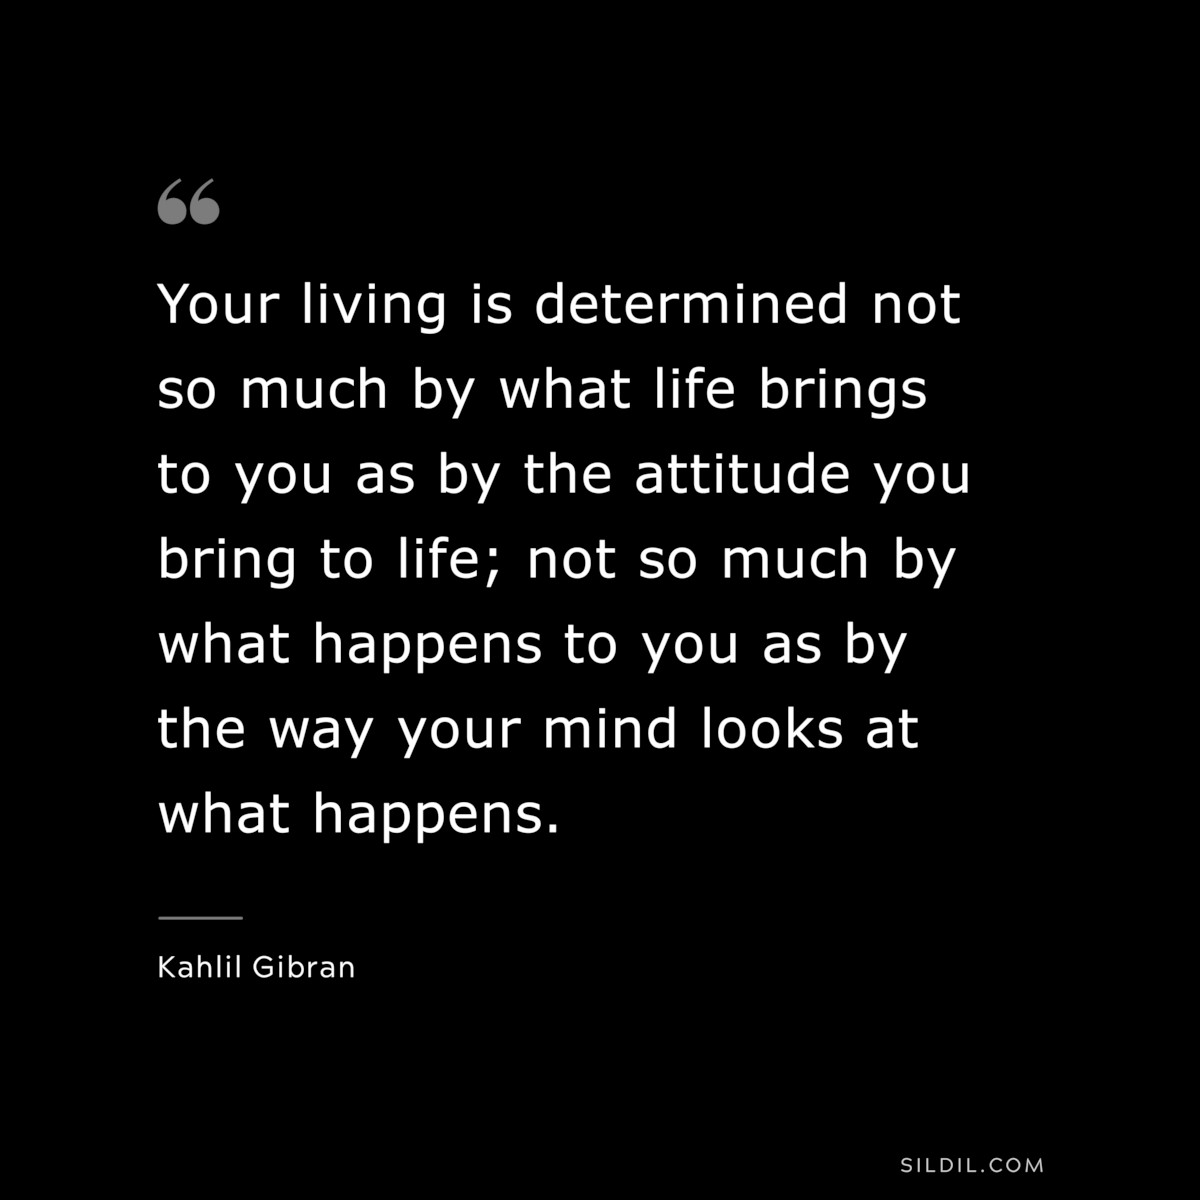 Your living is determined not so much by what life brings to you as by the attitude you bring to life; not so much by what happens to you as by the way your mind looks at what happens. ― Kahlil Gibran